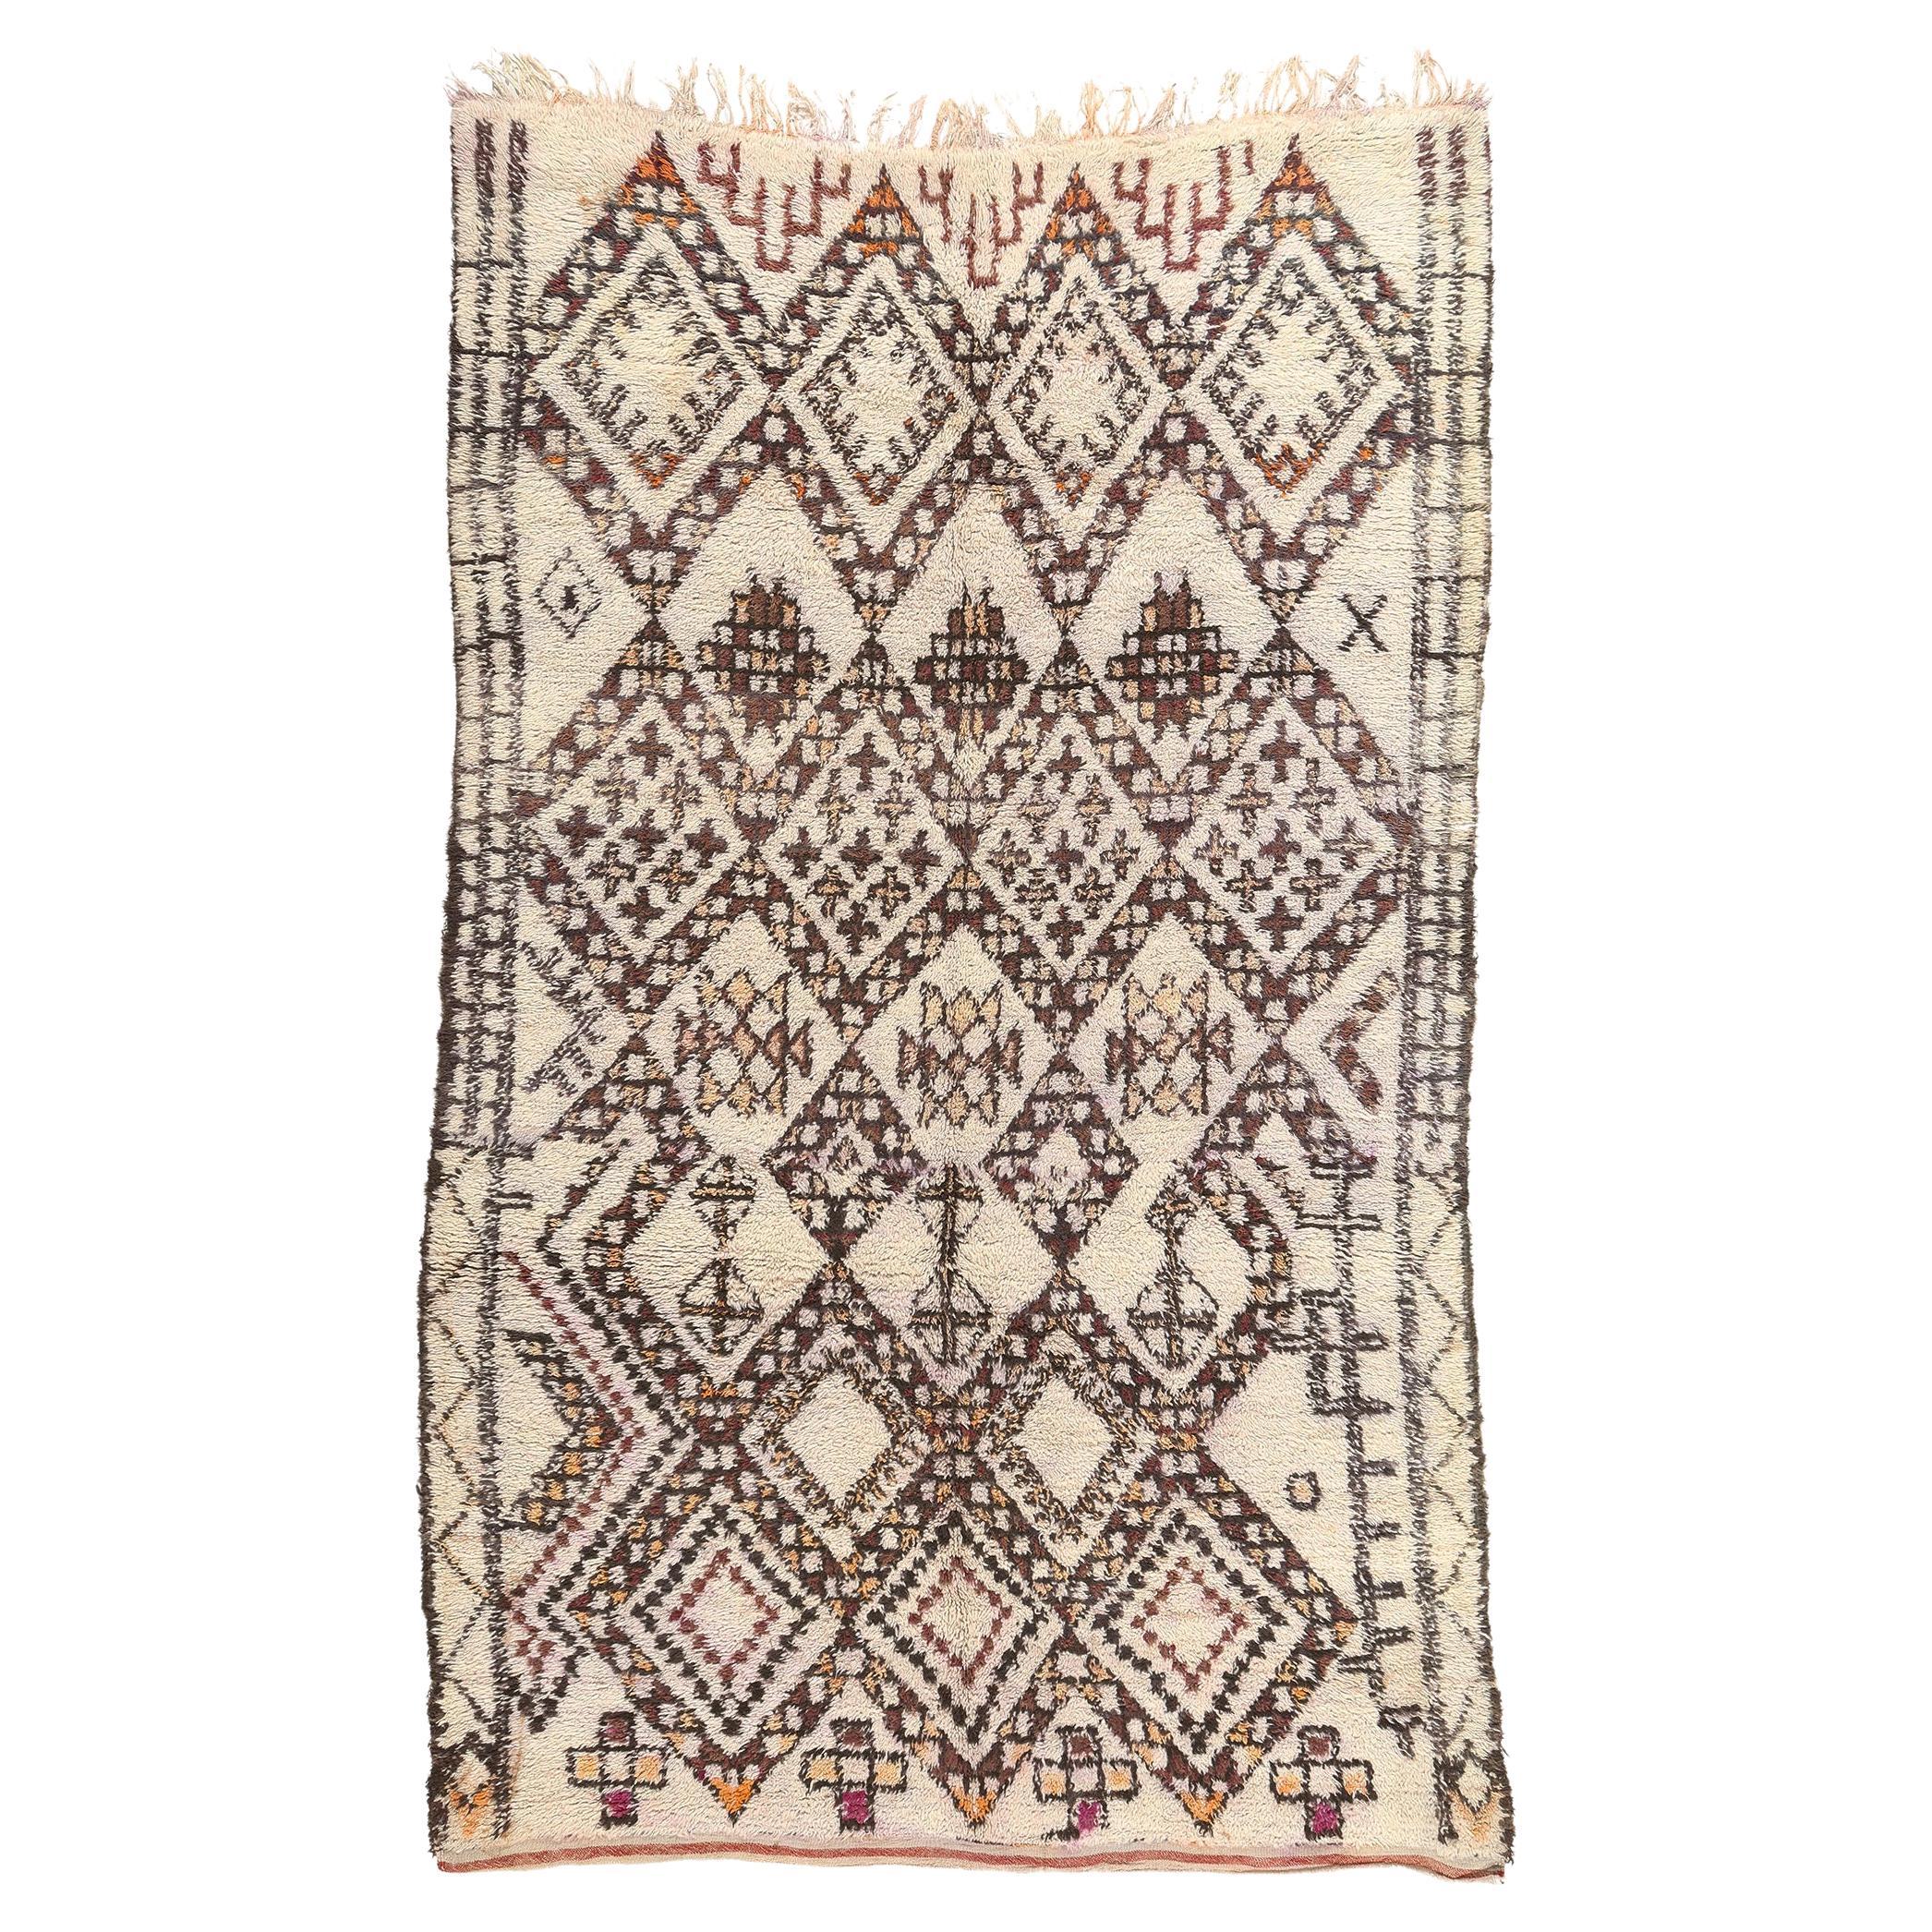 Vintage Moroccan Beni Ourain Rug, Midcentury Modern Meets Nomadic Charm For Sale